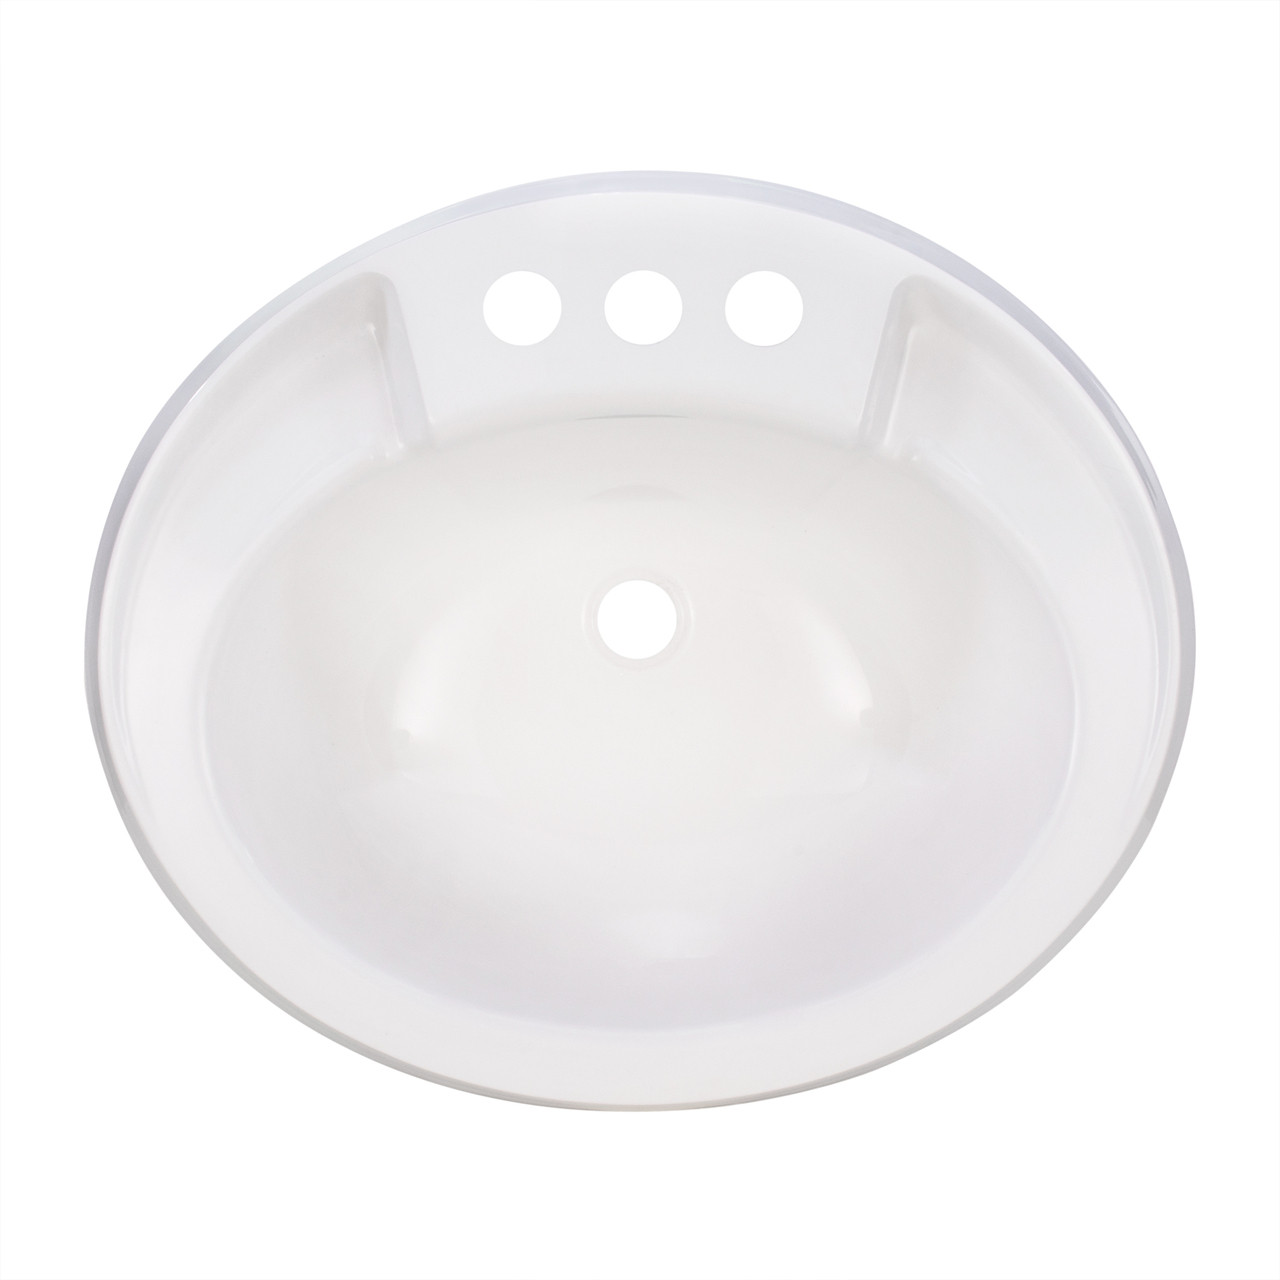 https://cdn11.bigcommerce.com/s-kwuh809851/images/stencil/1280x1280/products/445/2031/White_Oval_Sink_Top__99412.1522764158.jpg?c=2